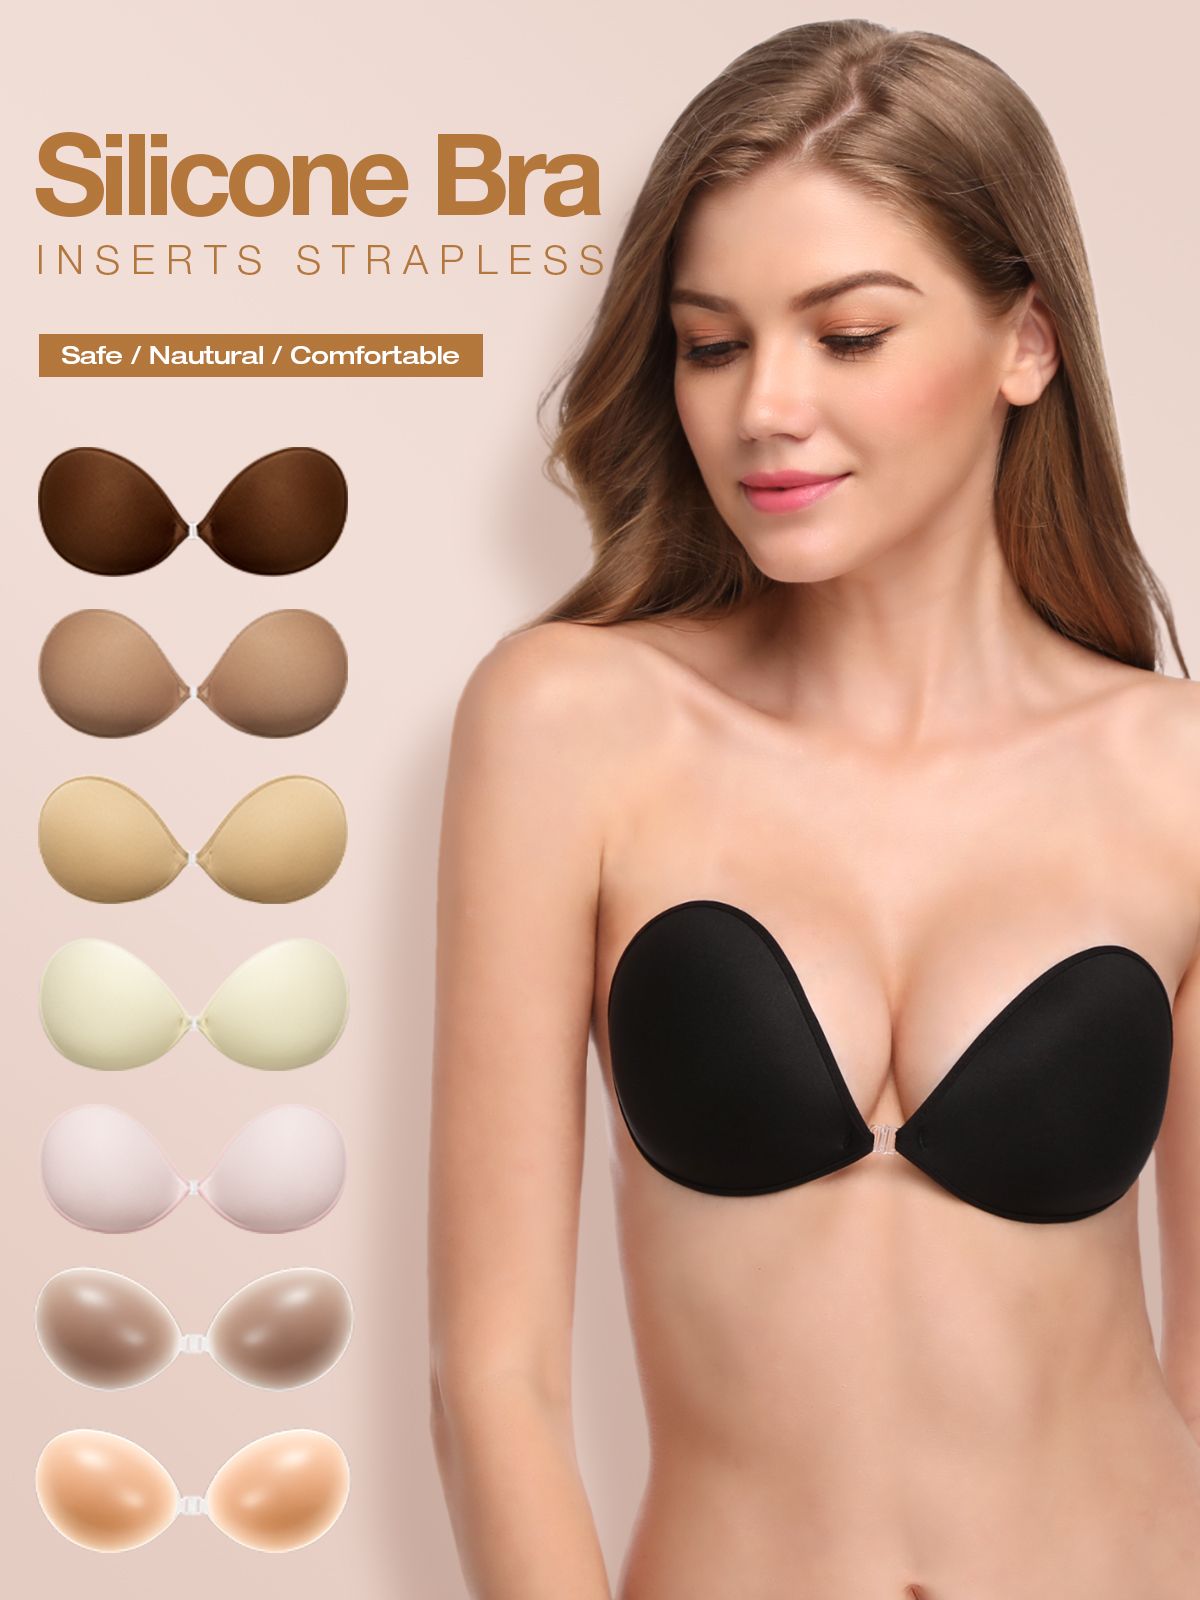 DIY shoulder pads from push up bra pads